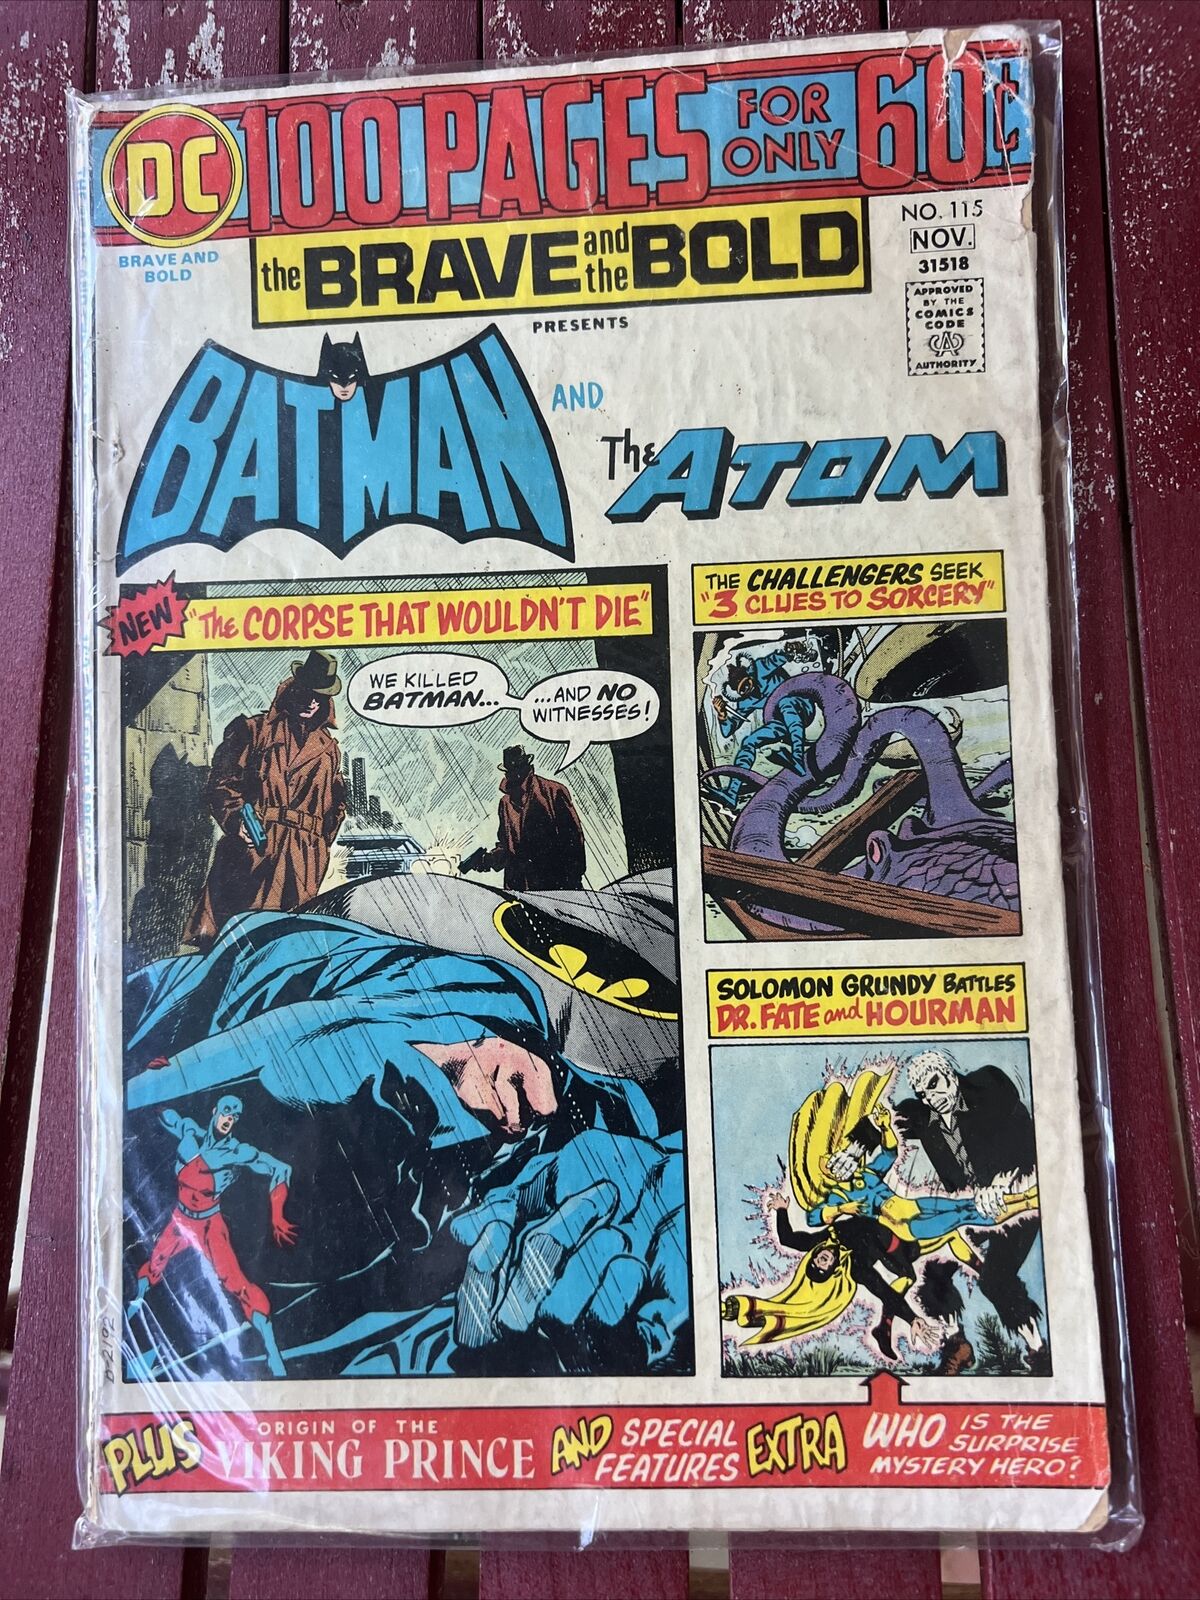 BRAVE AND THE BOLD # 115 (BATMAN & THE ATOM, 100 pg. GIANT-SIZE, Nov 1974)